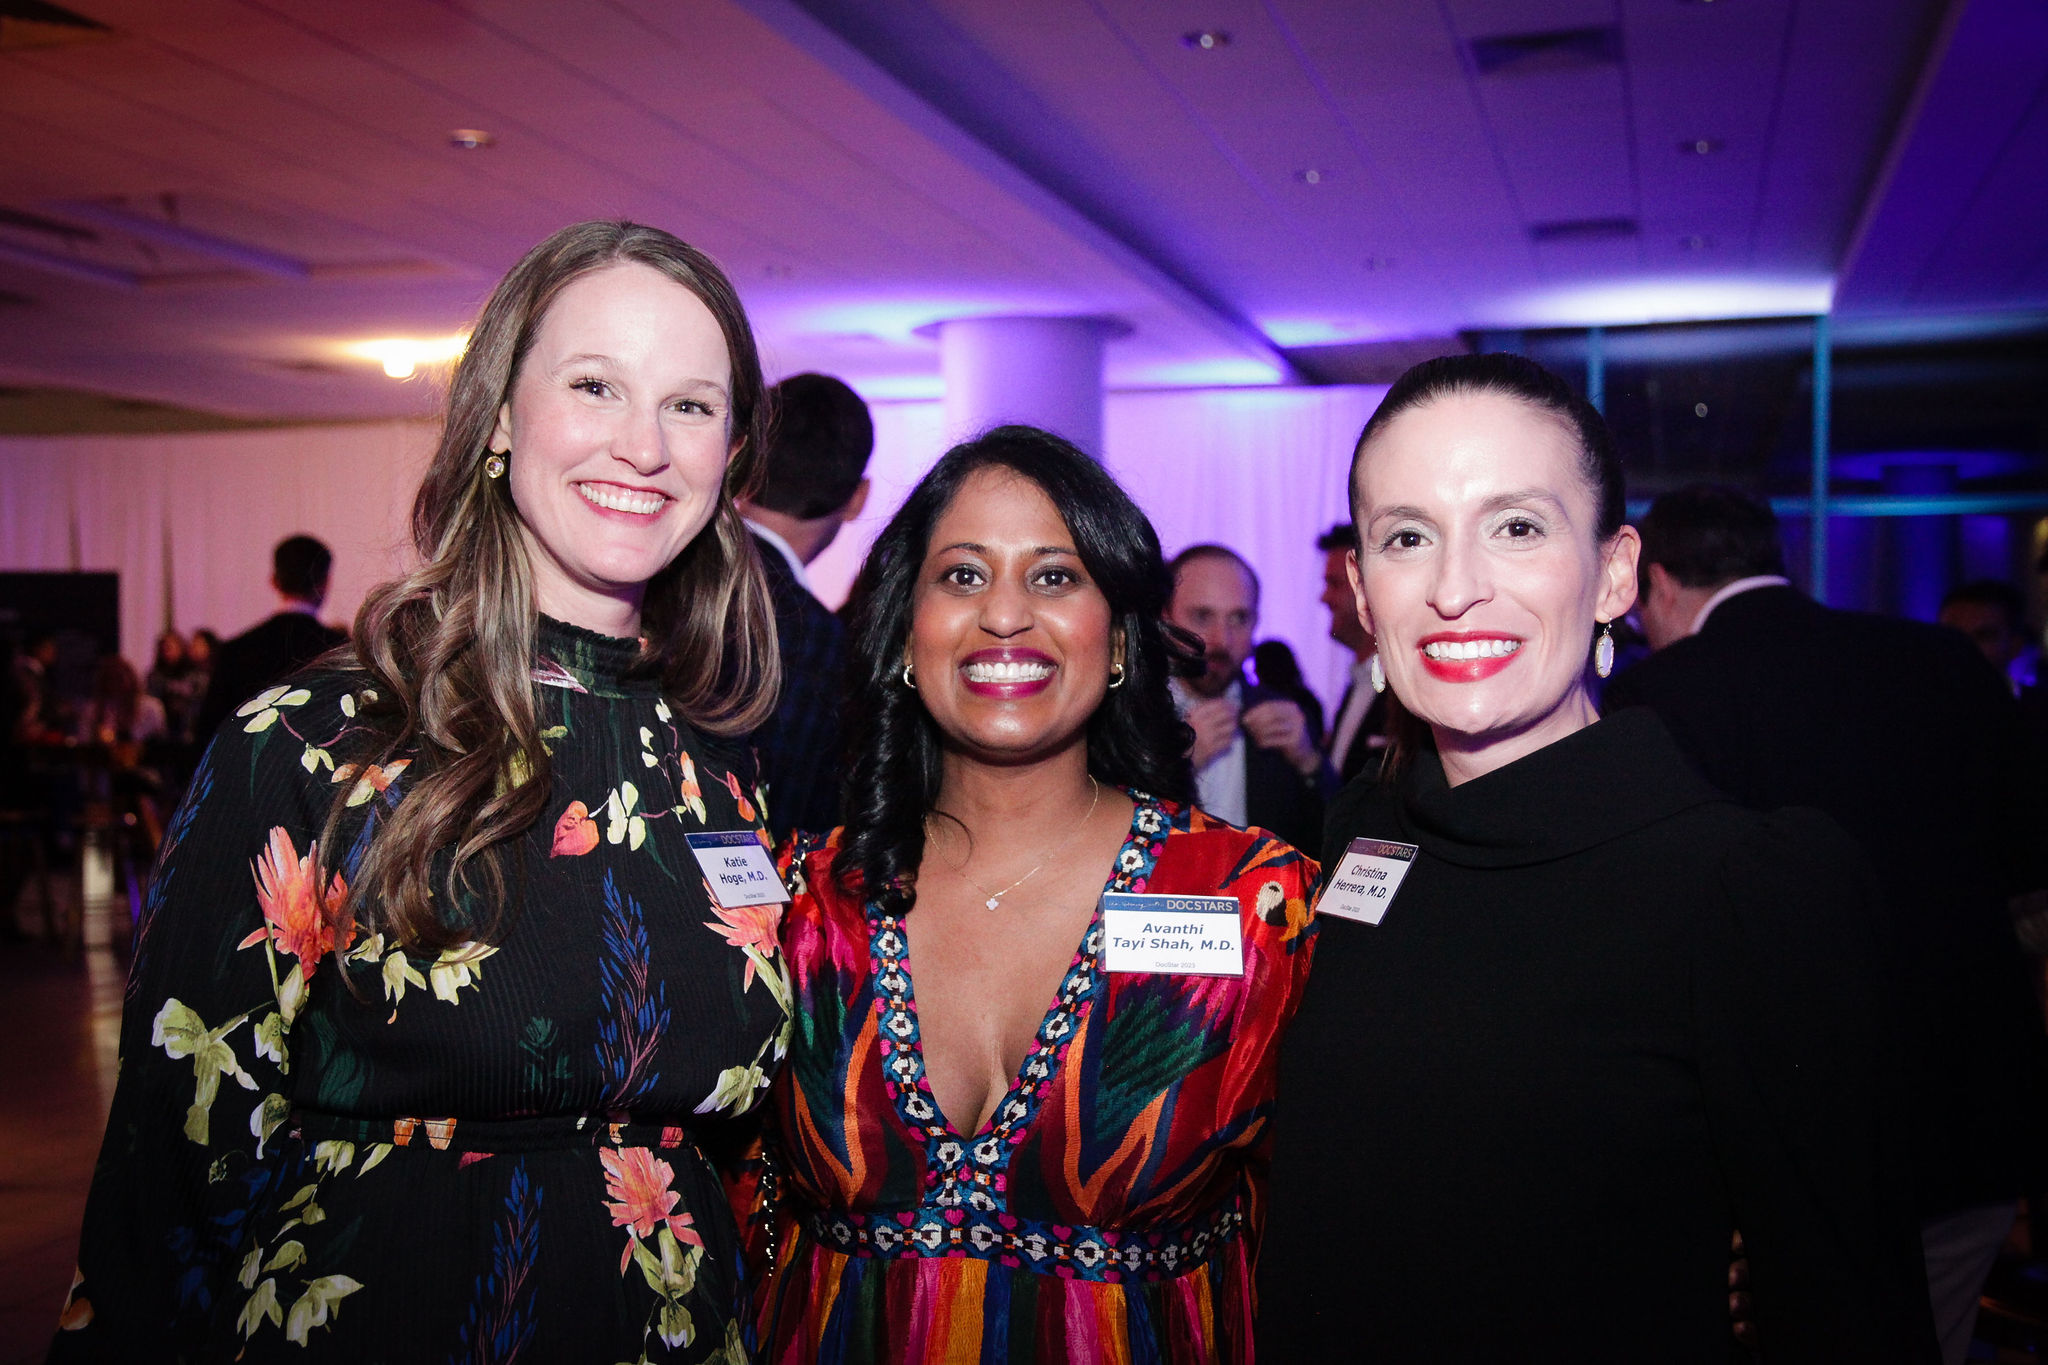 The 2023 DocStars: Dr. Katie Hoge, Dr. Avanthi Tayi Shah, and Dr. Chris Herrera pose for a photo at An Evening with DocStars.